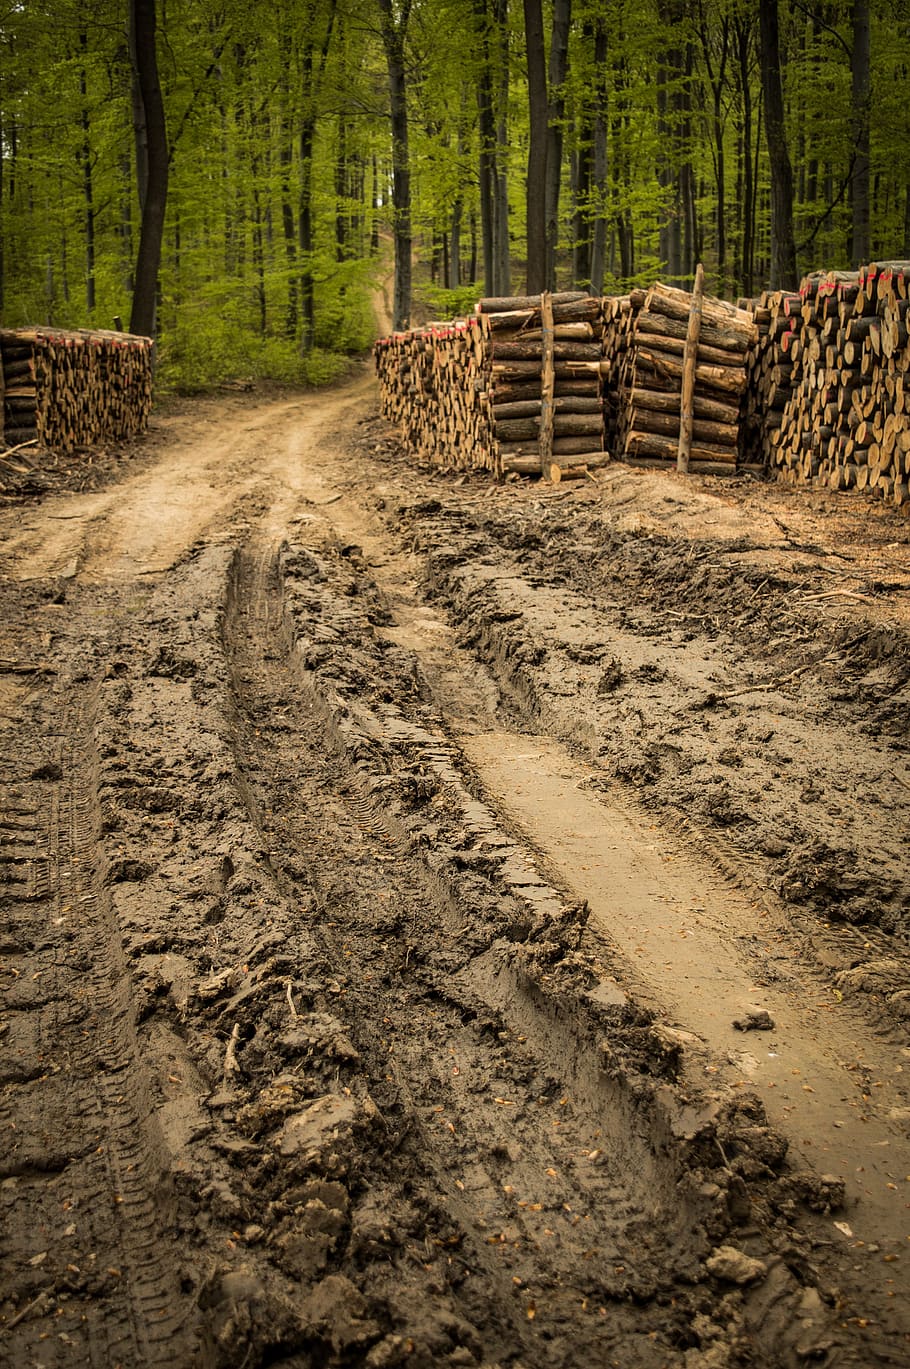 soil, nature, outdoors, wood, tree, wood pile, forest, land, log, dirt road